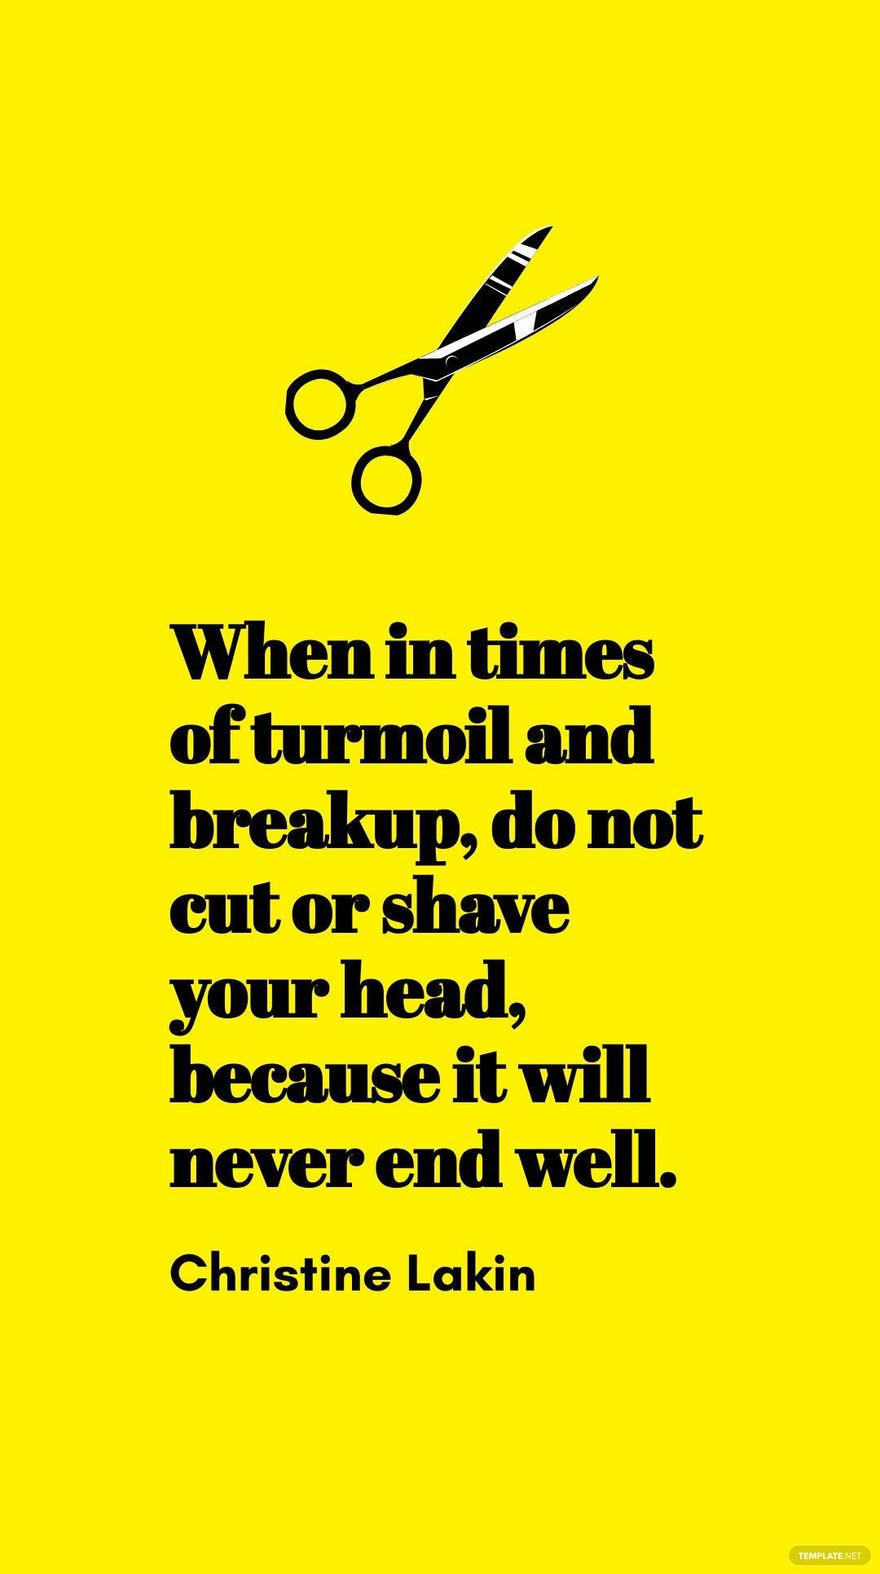 Christine Lakin - When in times of turmoil and breakup, do not cut or shave your head, because it will never end well.